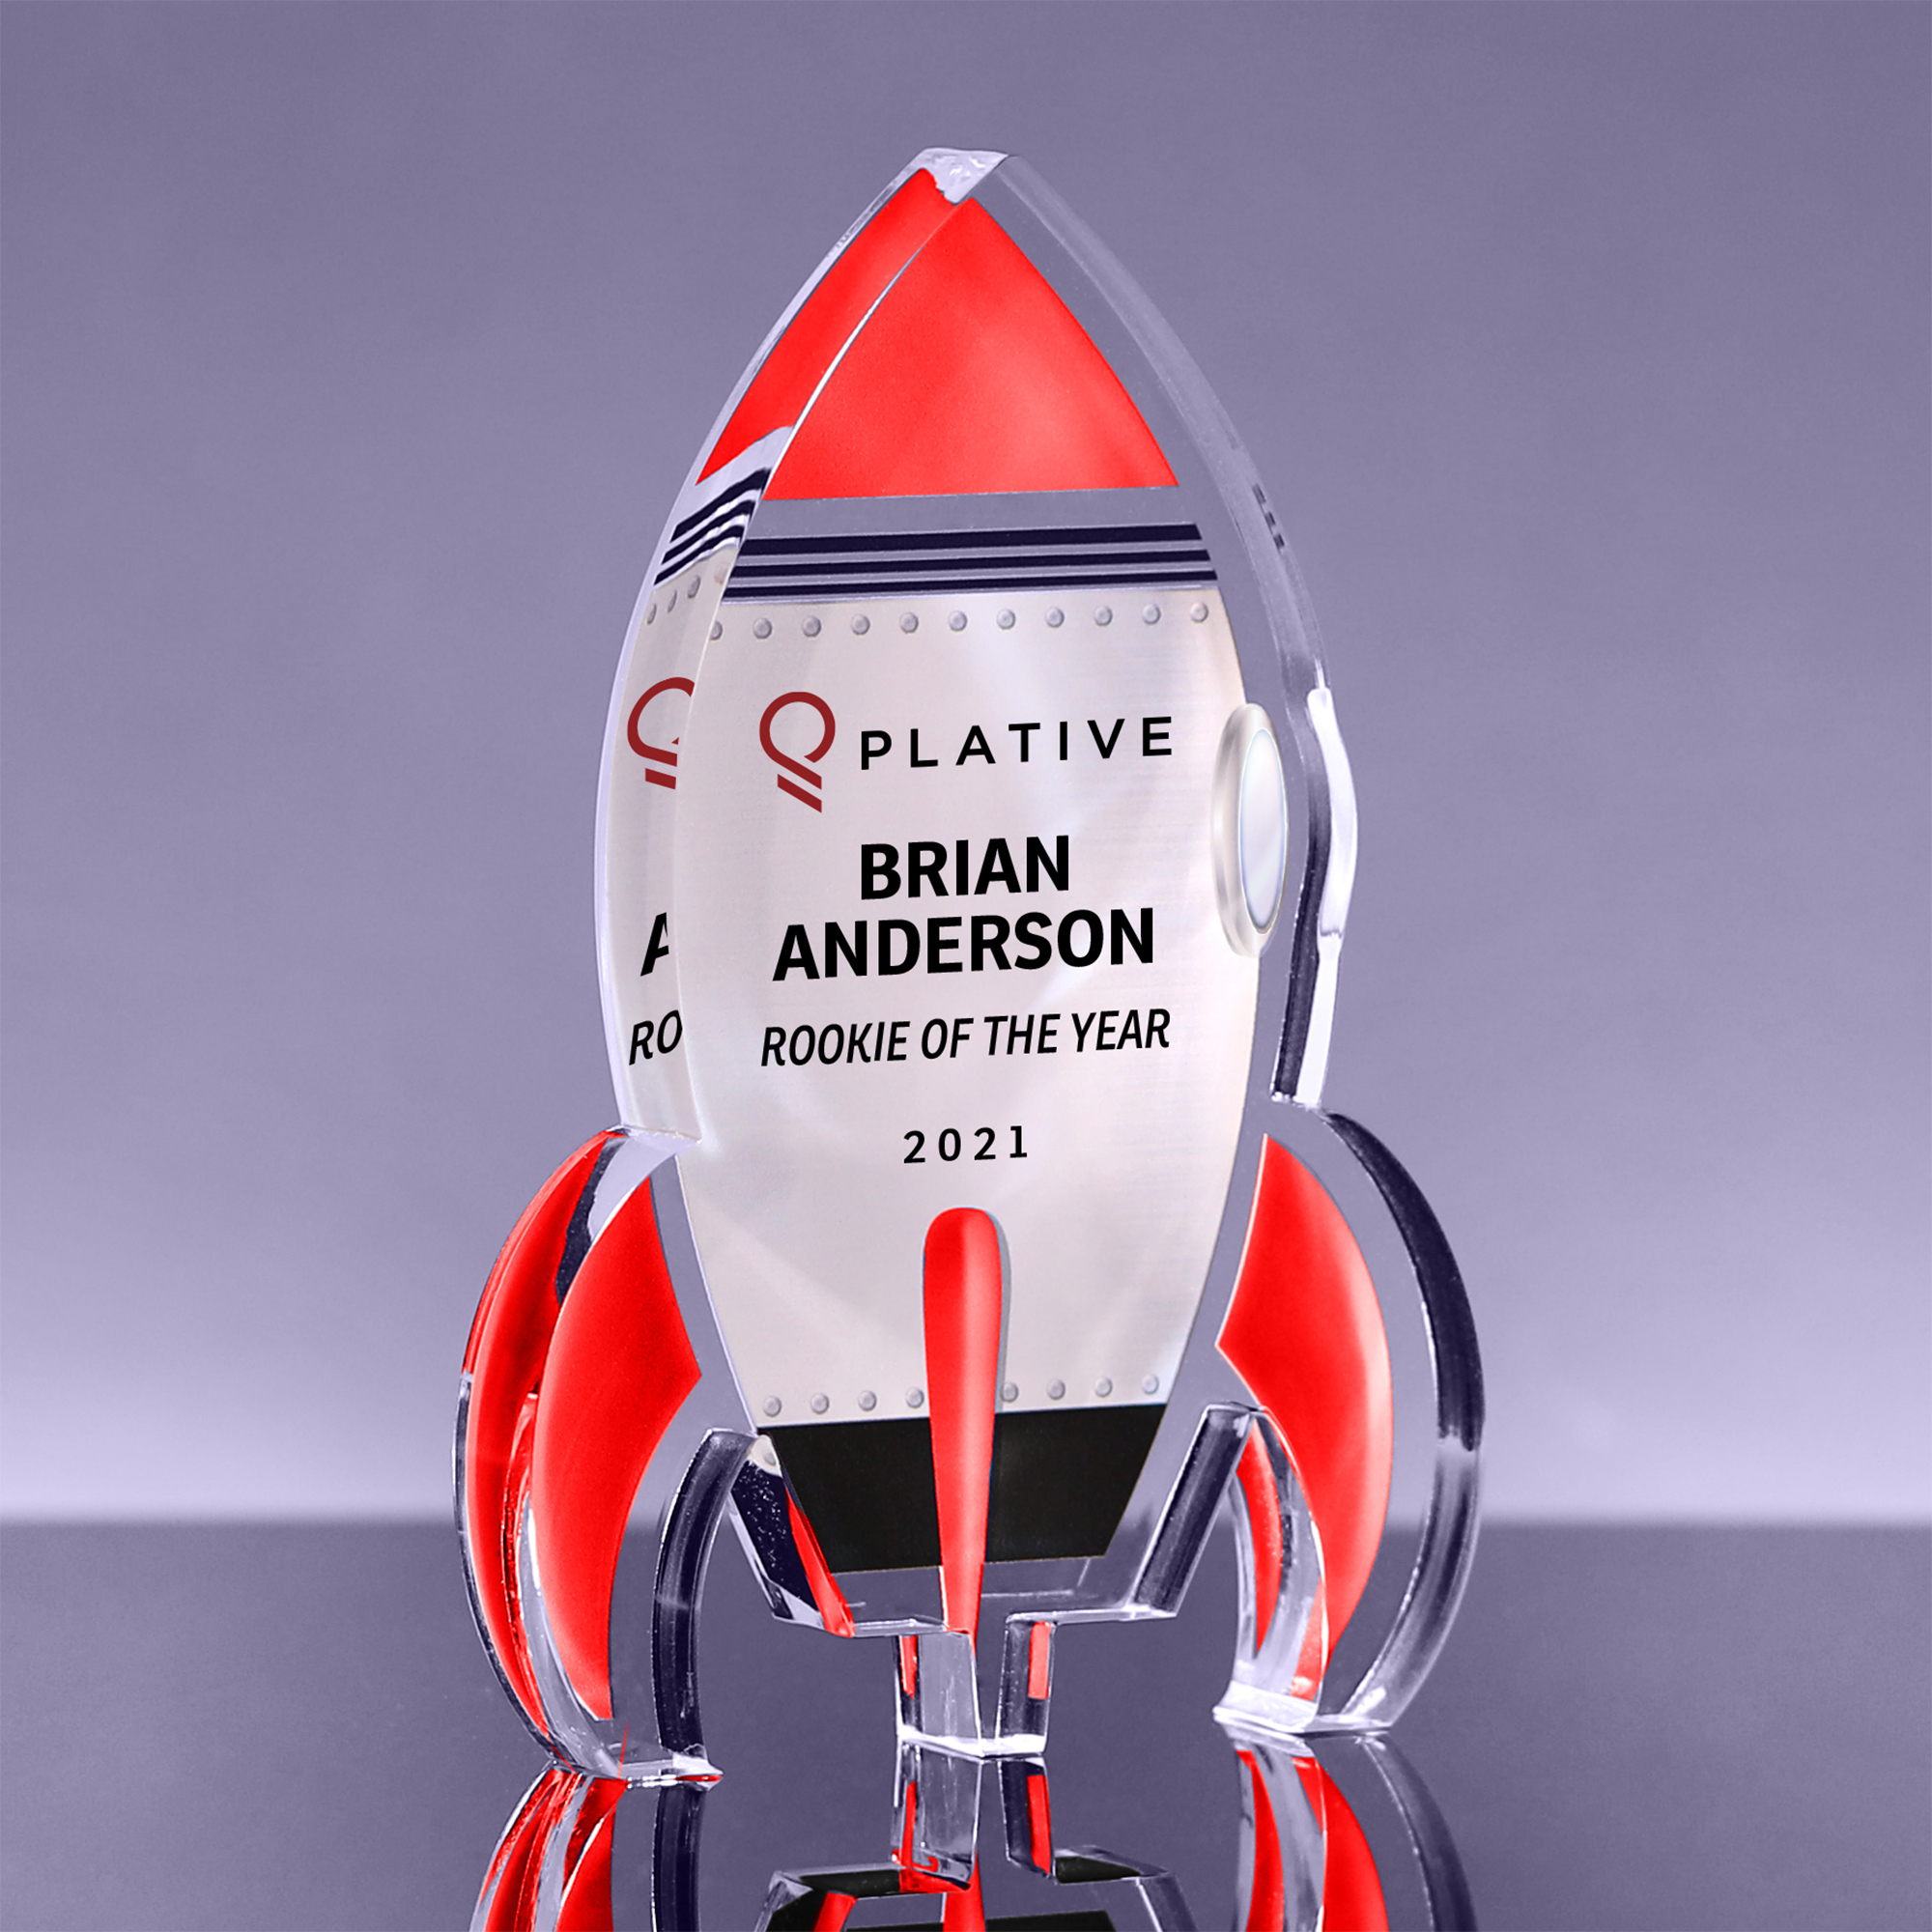 Red Full Color Rocket Acrylic Award - 6 inch